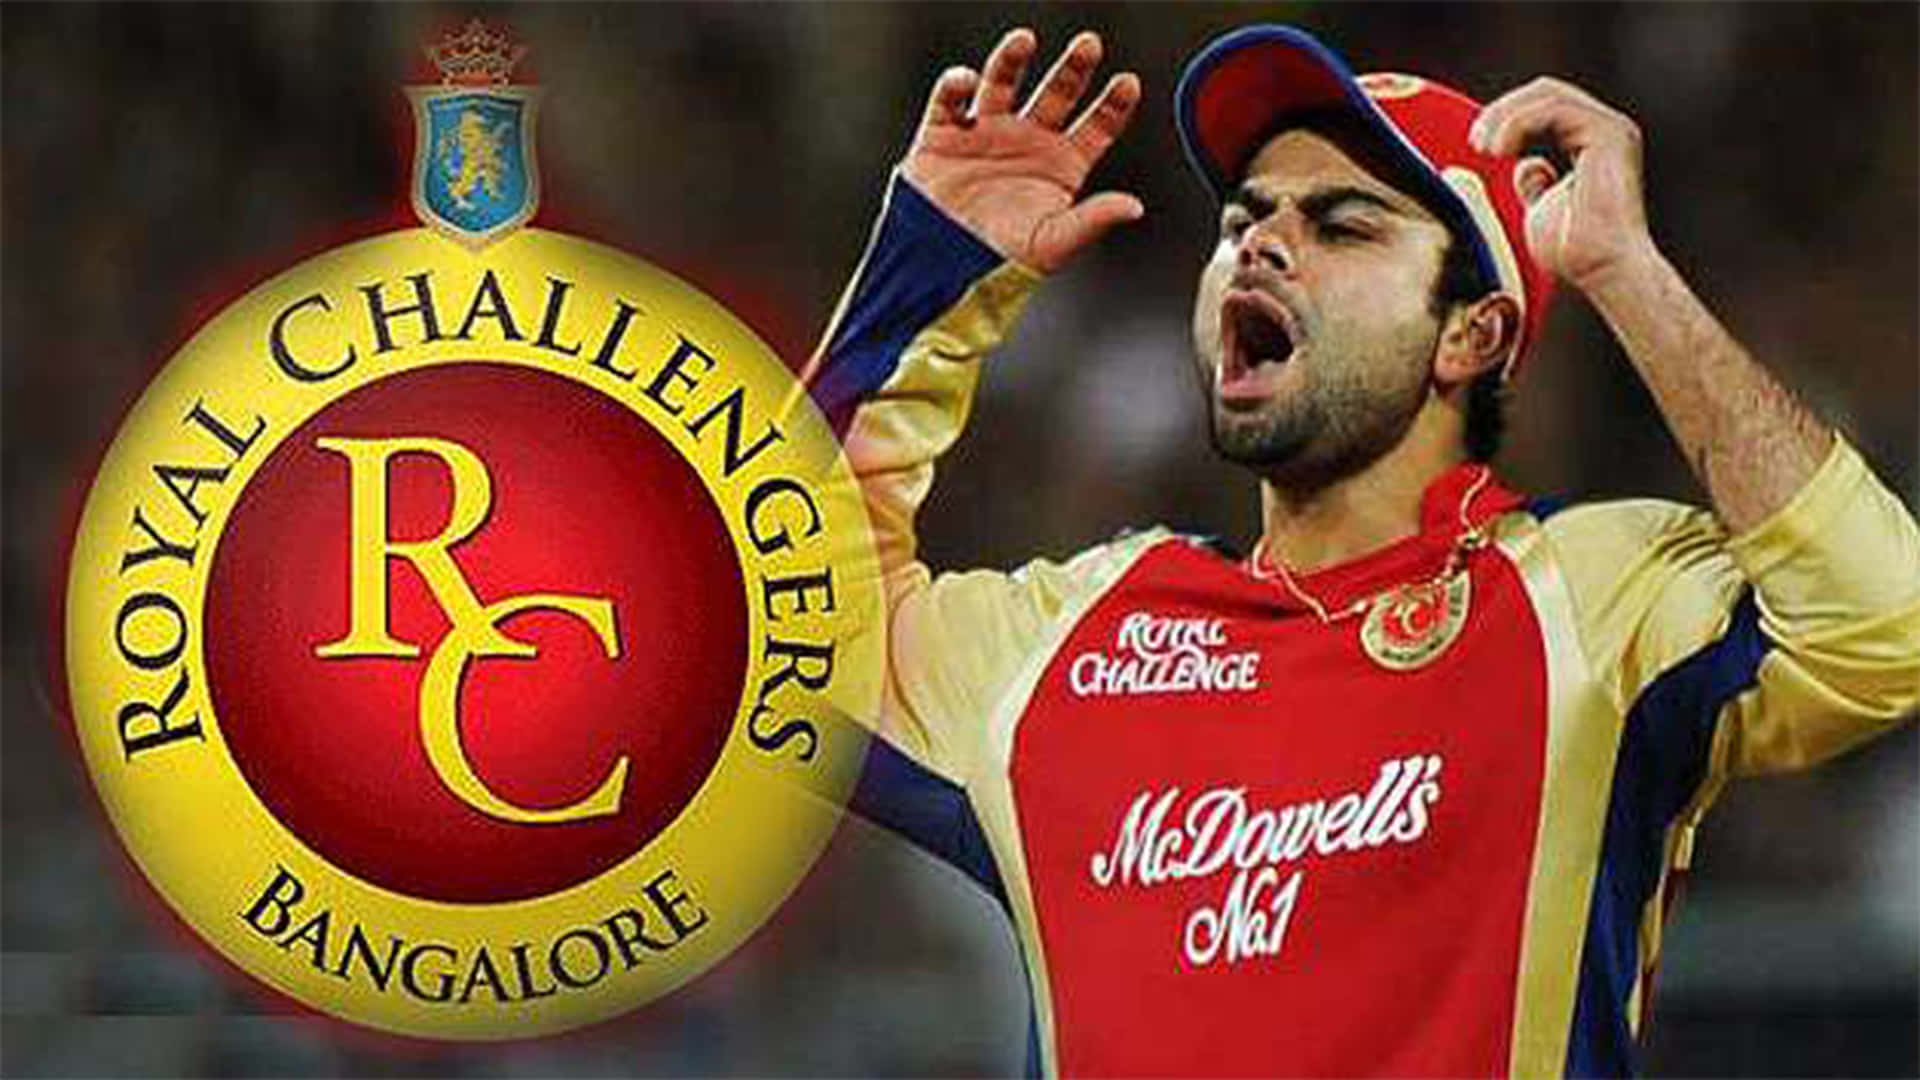 Royal Challengers Bangalore - The Symbol of Royalty